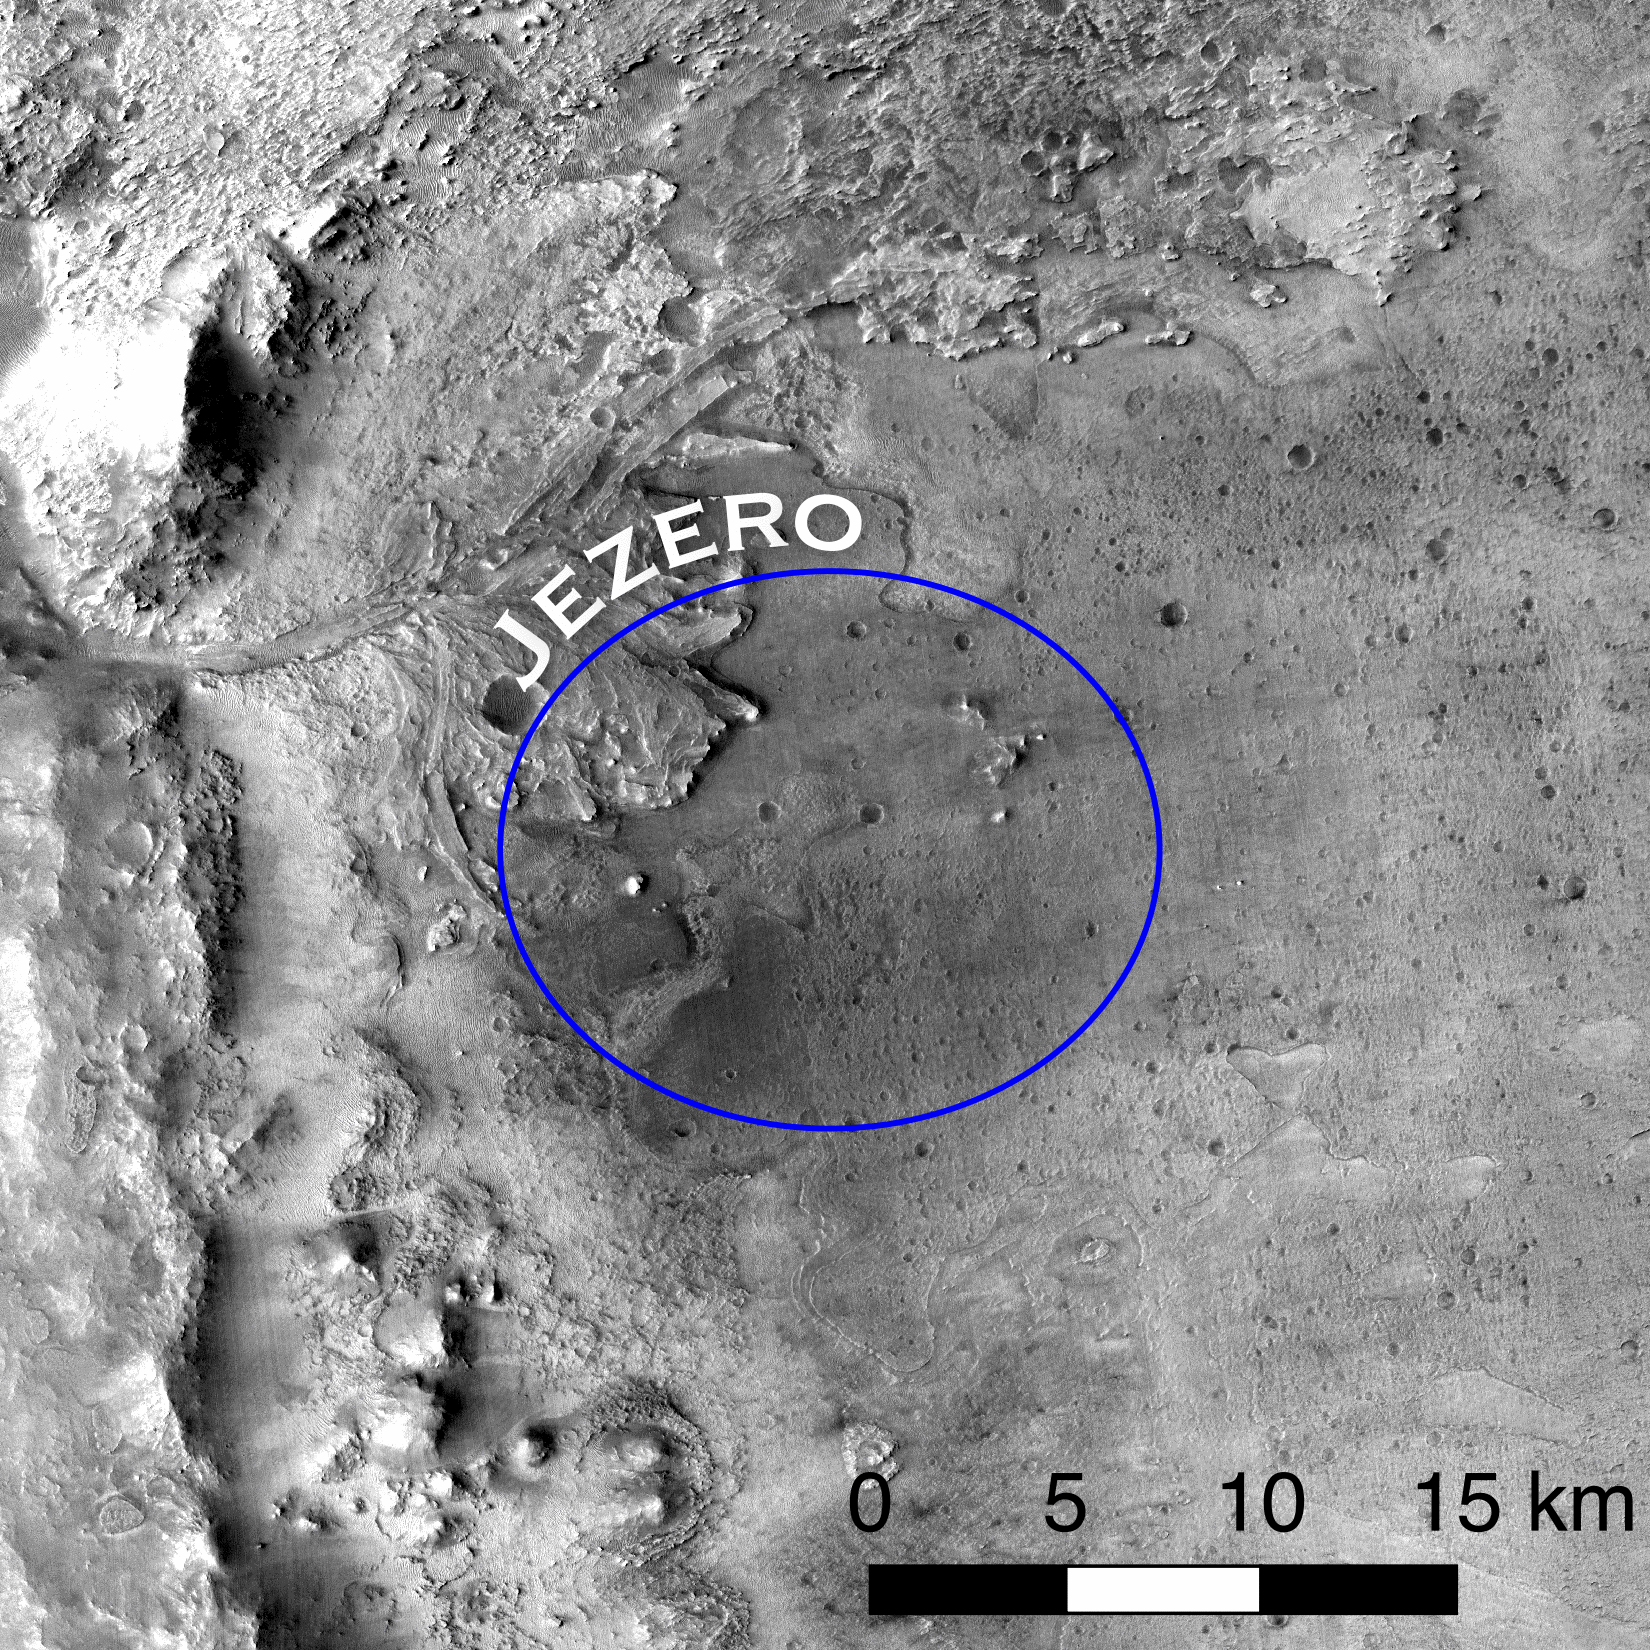 **Craters mapped near the Jezero landing site within Jezero Crater.** Evidence of a long dried up river delta lies just Northwest of the Jezero landing ellipse. The Mars 2020 rover will take soil samples in this area and search for signs of past microbial life.